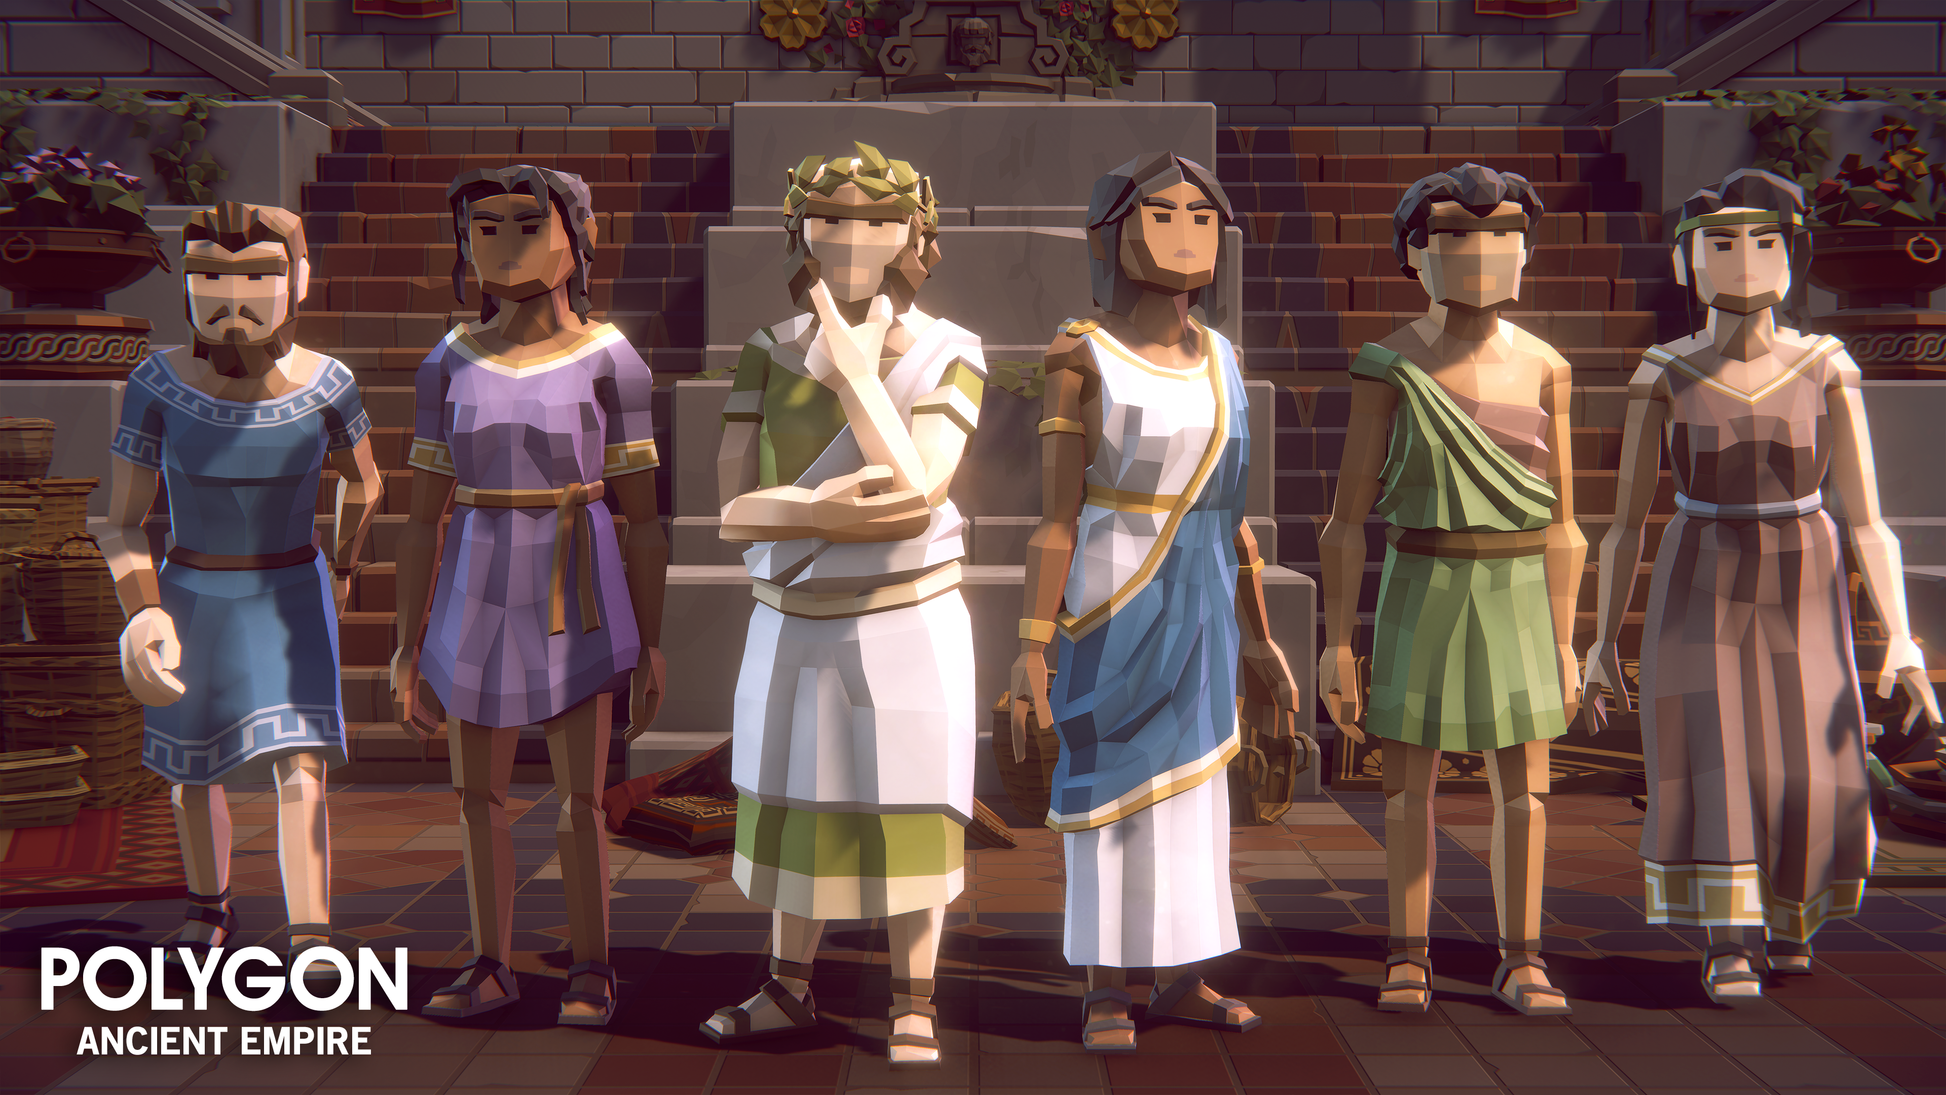 Six low poly ancient myth male and female characters standing next to one another